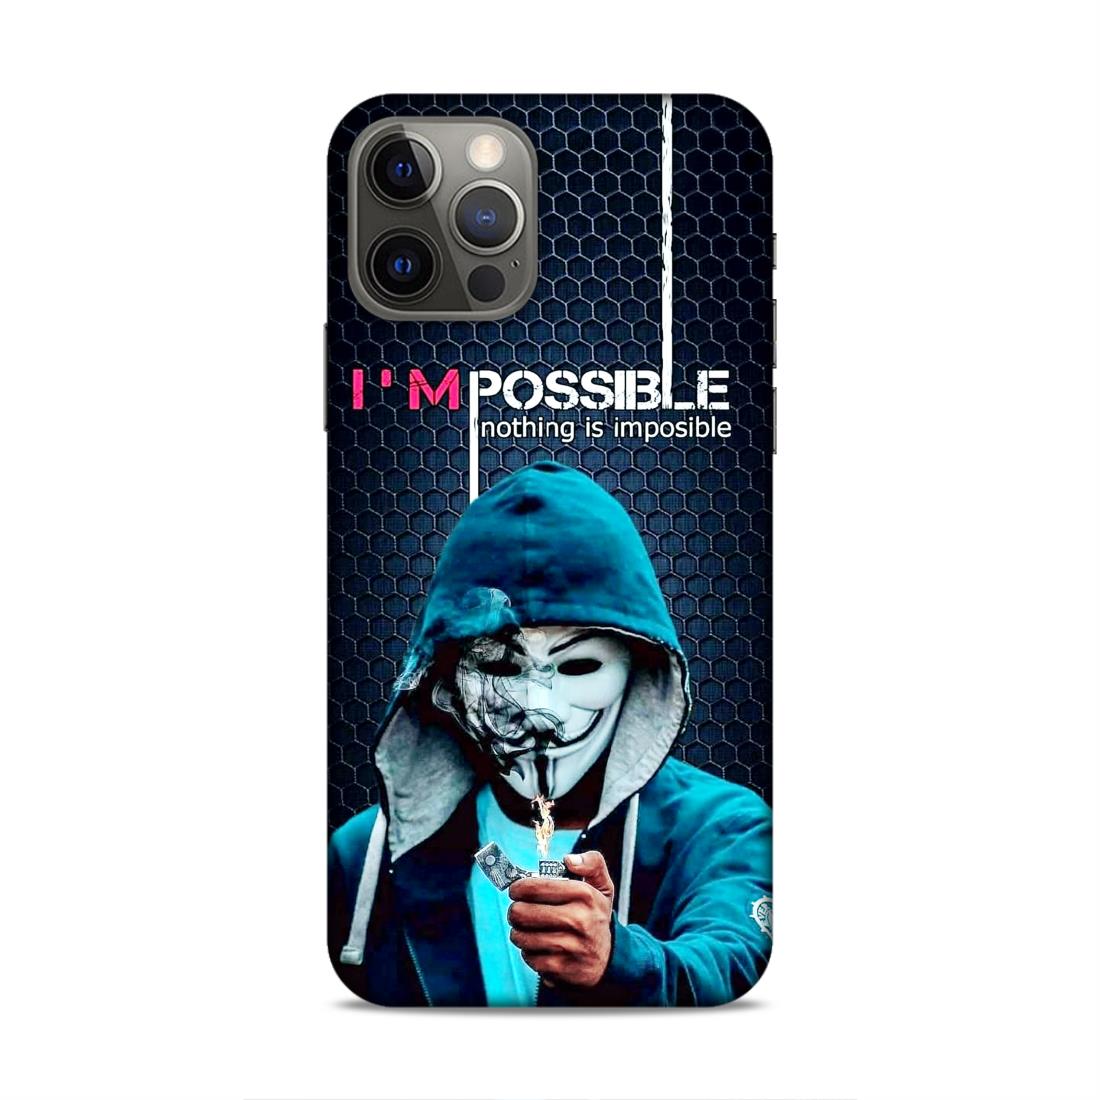 Im Possible Hard Back Case For Apple iPhone 12 / 12 Pro